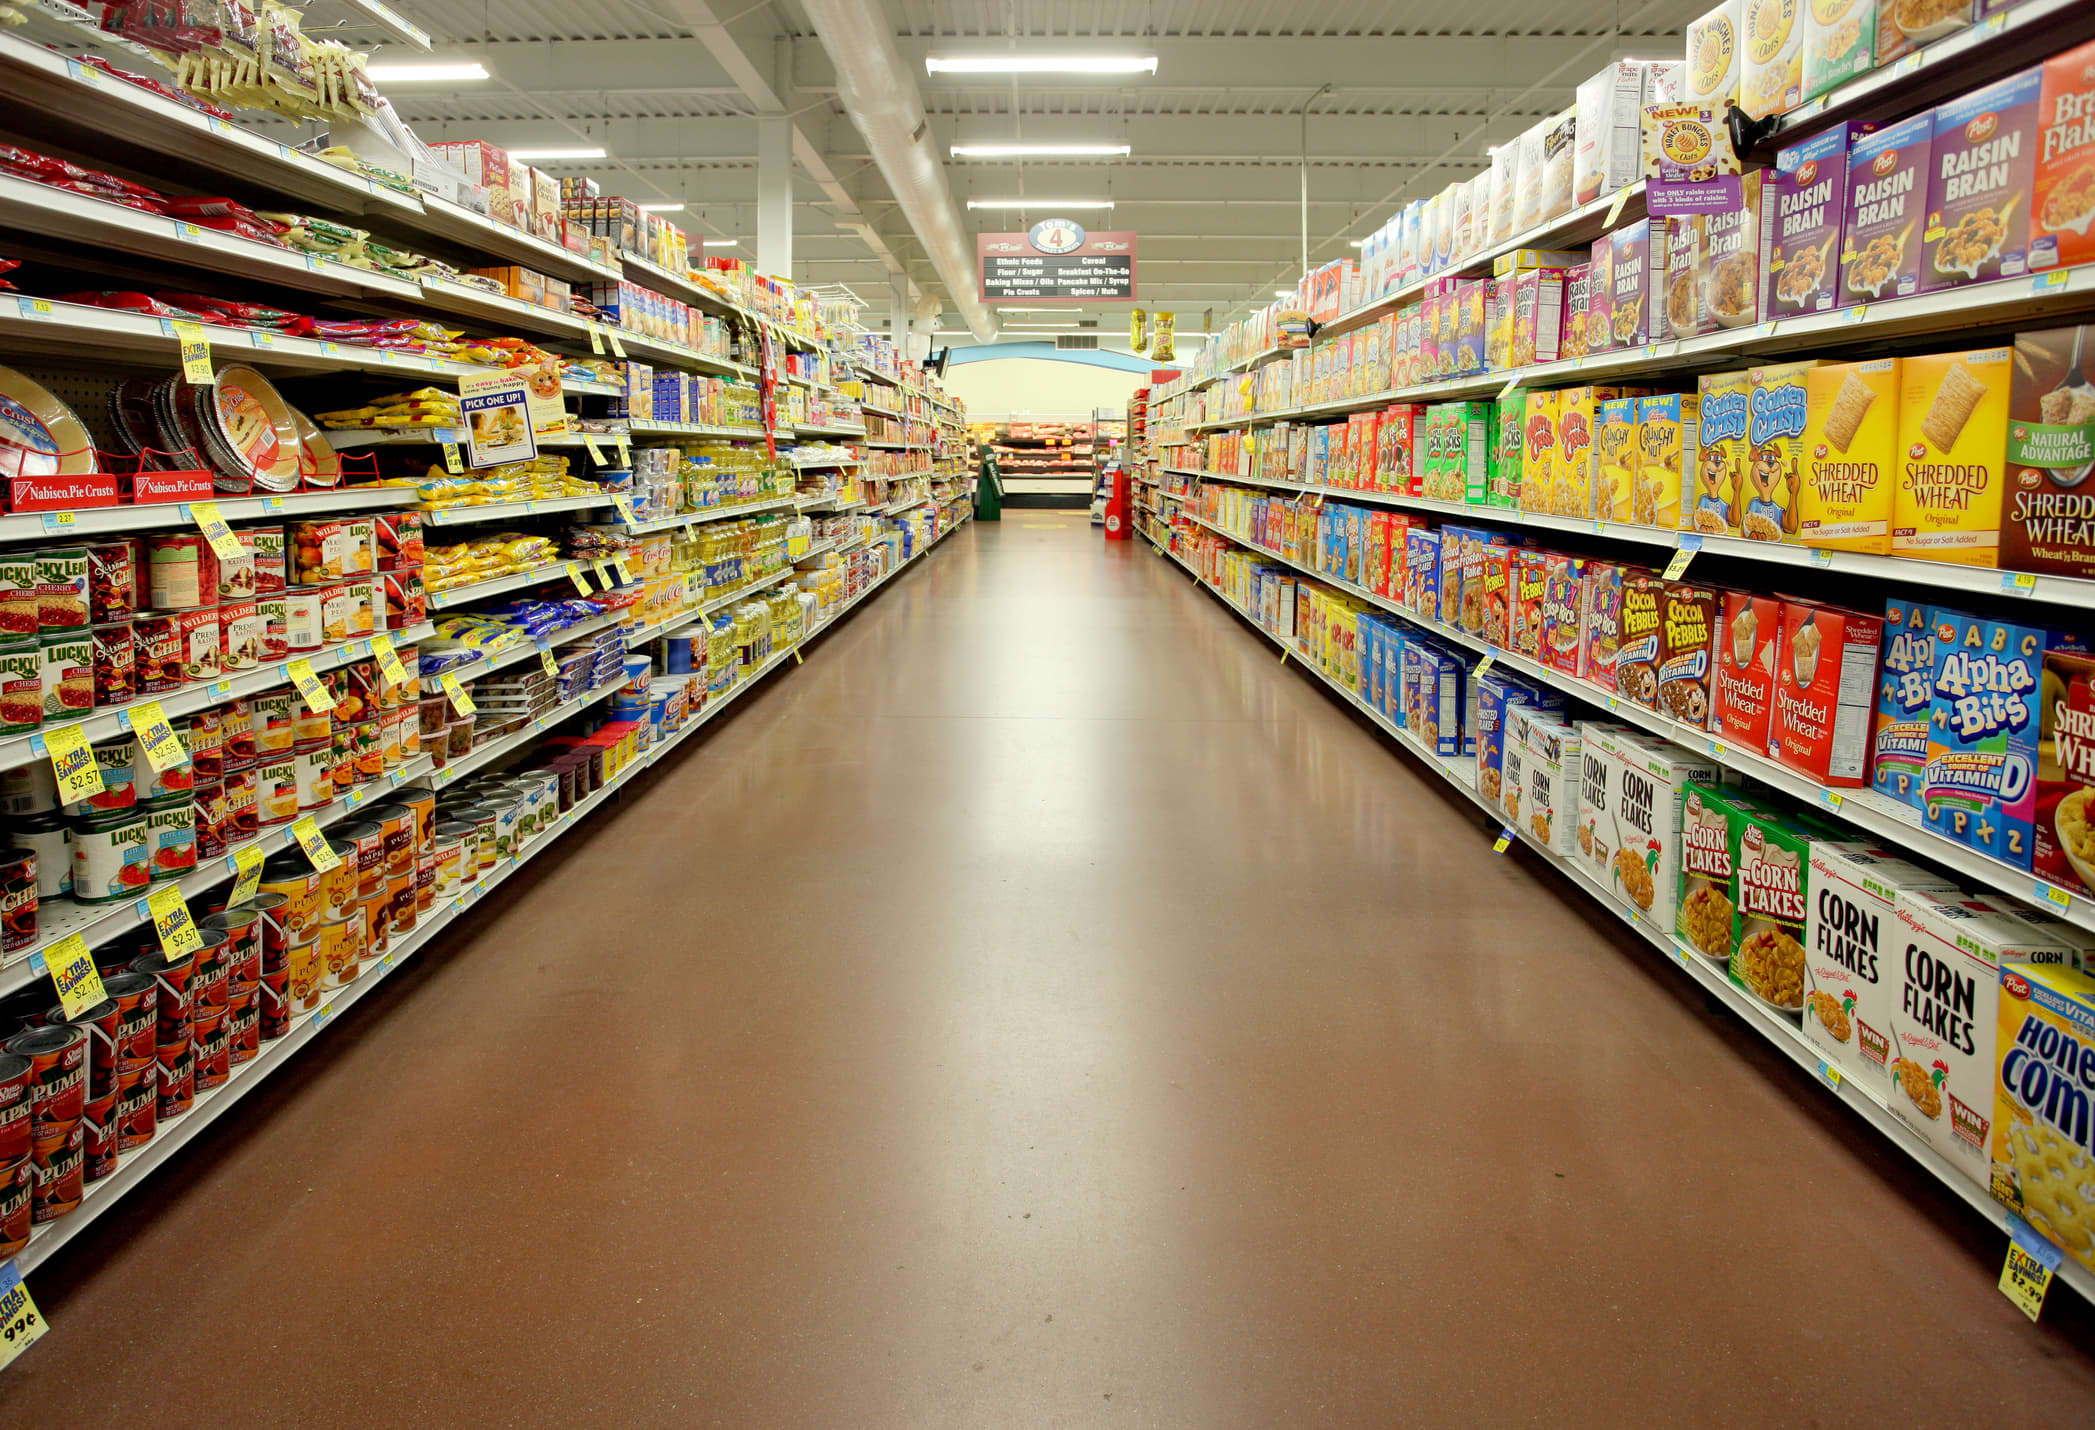 Cheapest Grocery Stores